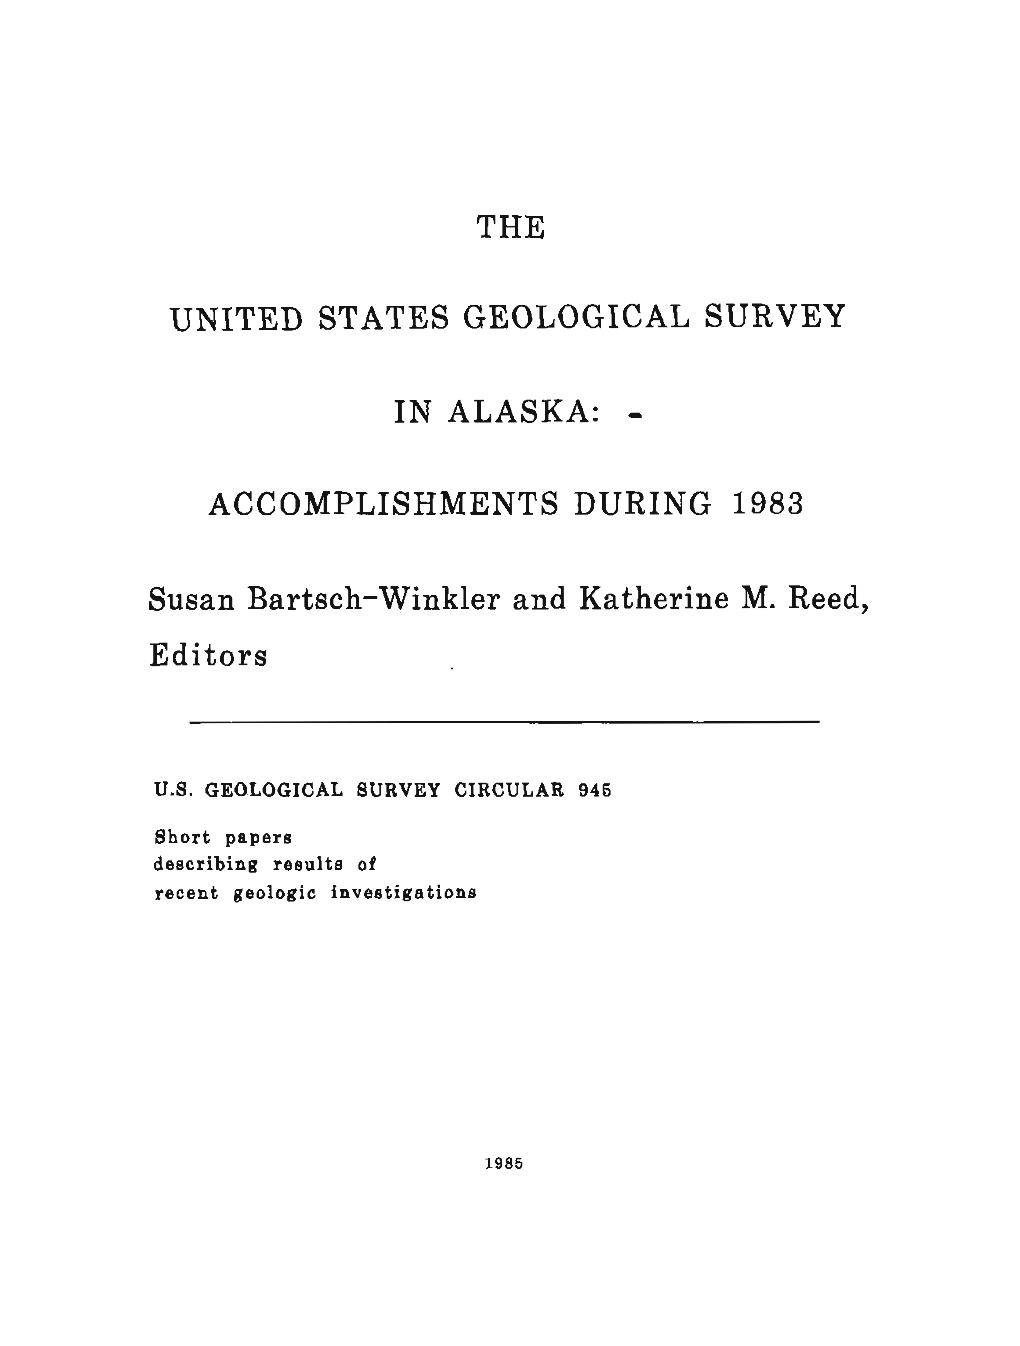 The United States Geological Survey in Alaska: Accomplishments During 1983